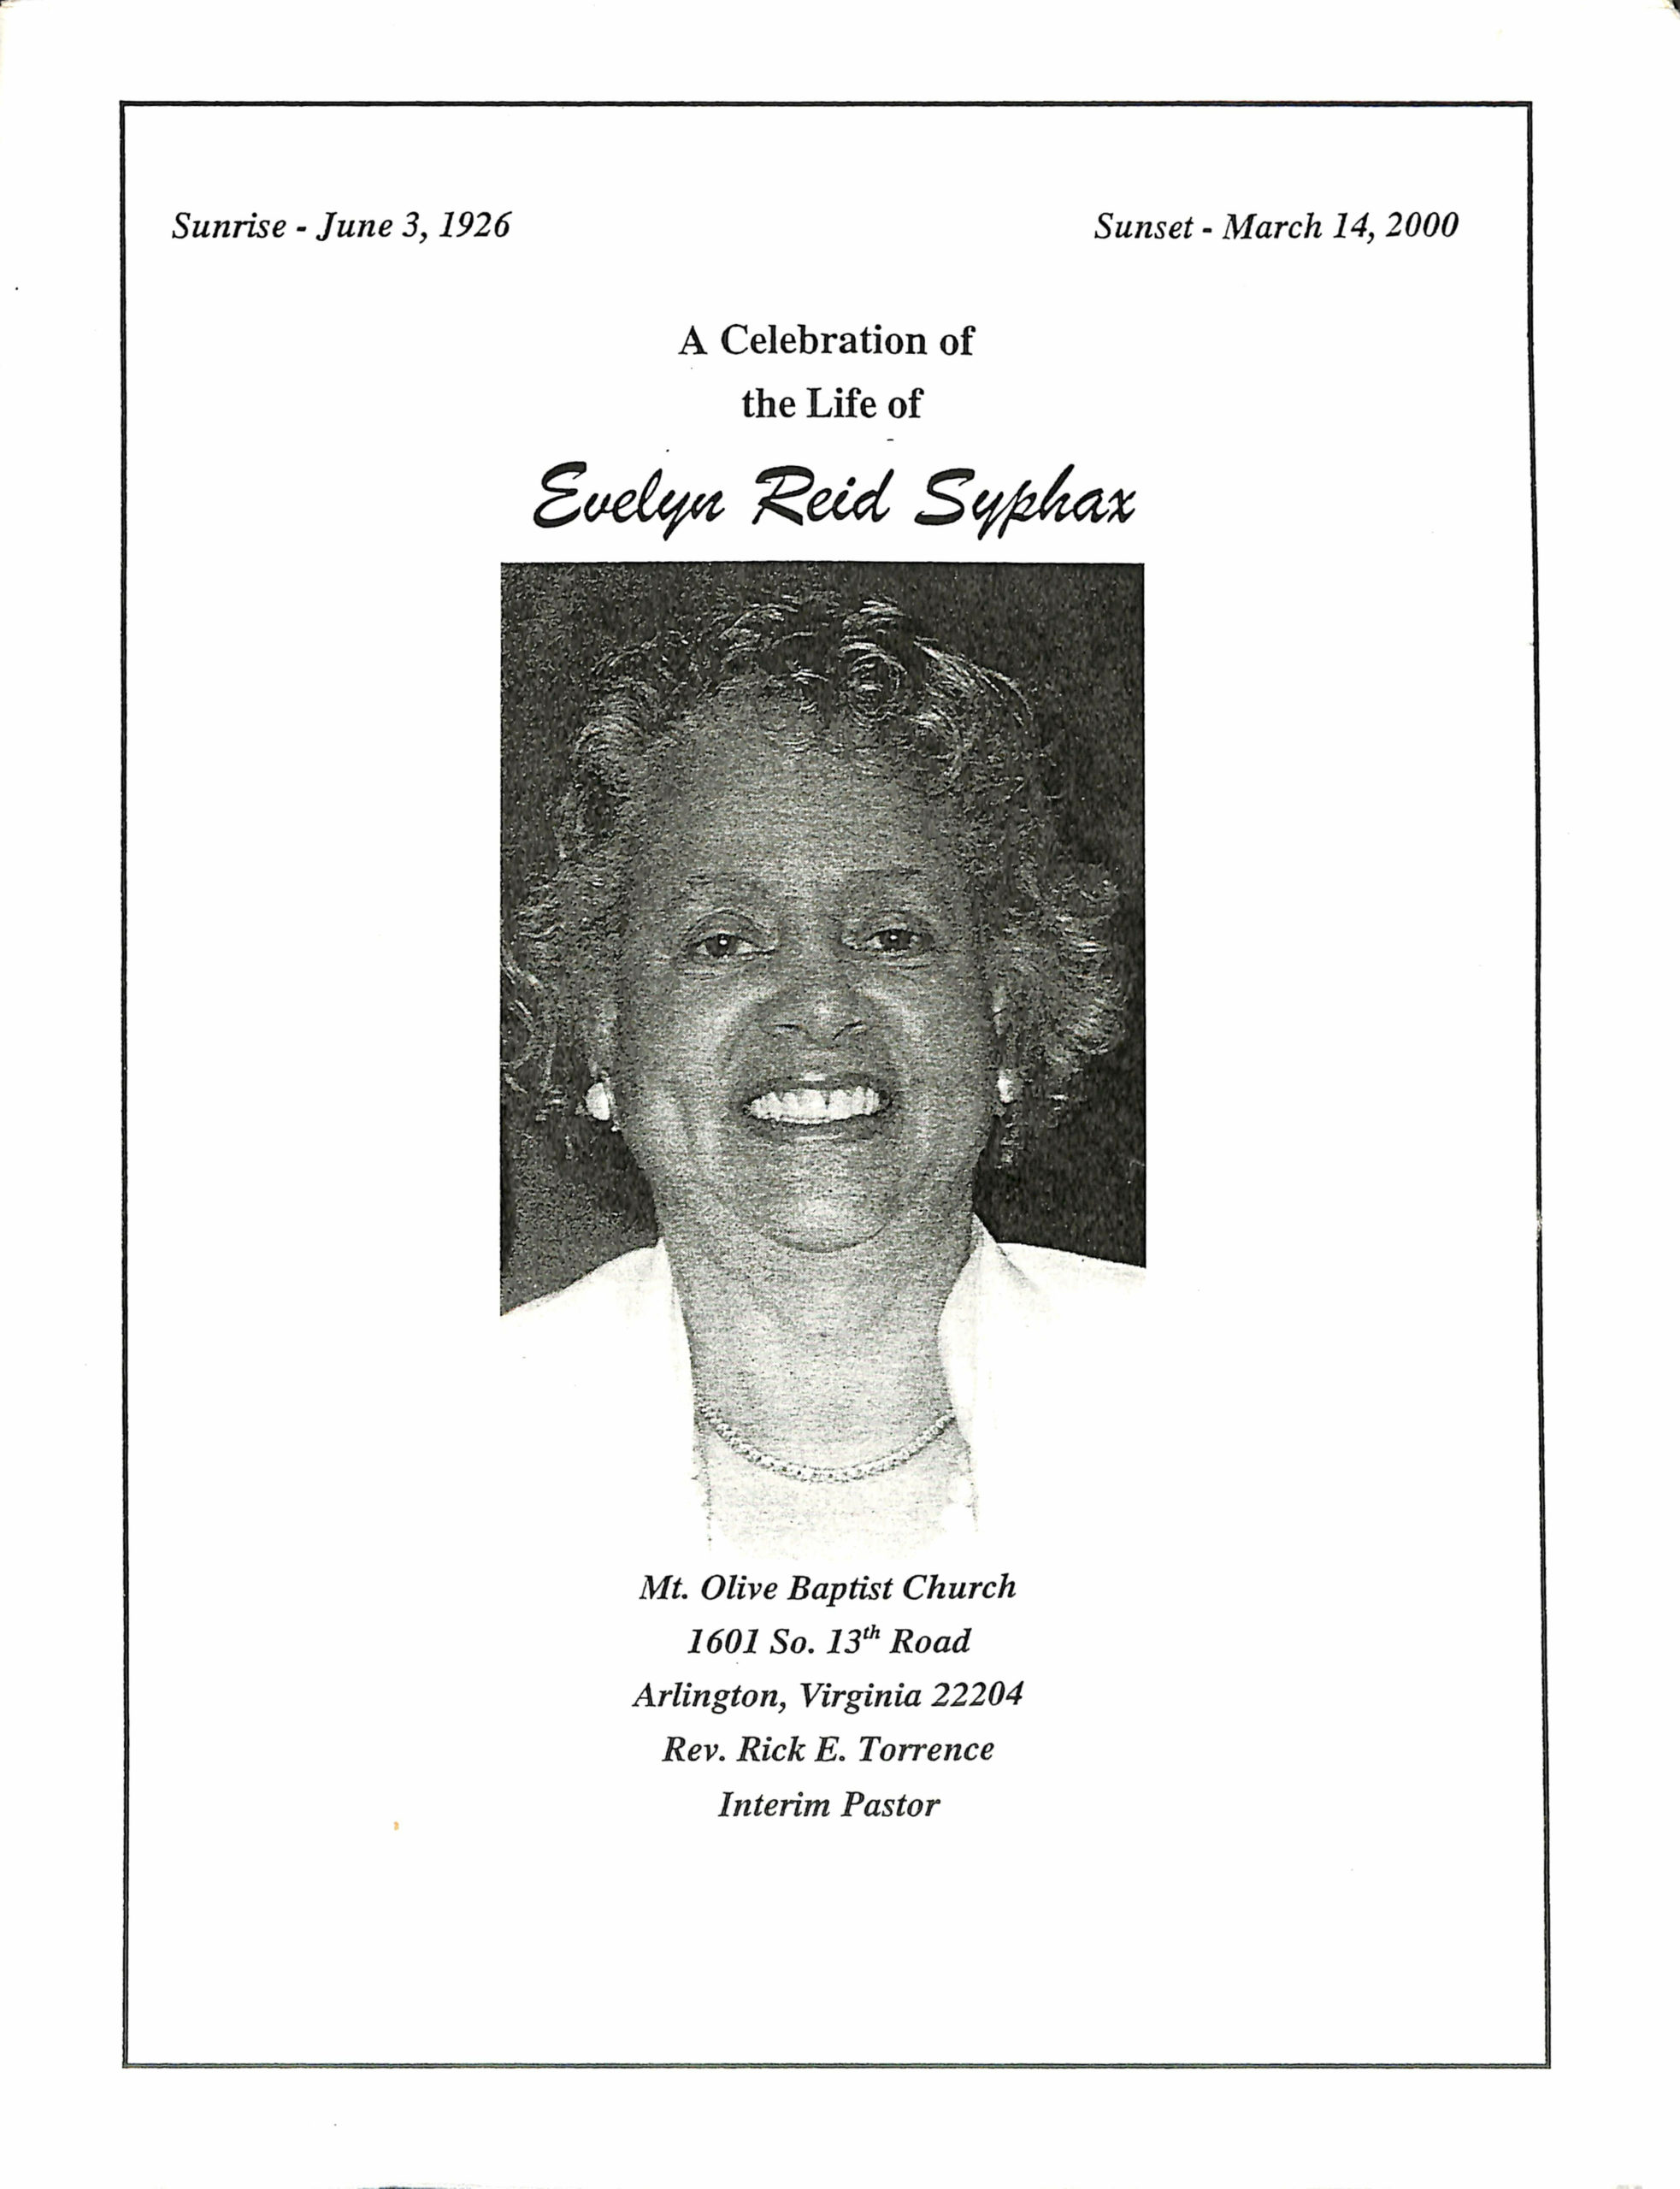 Link to Funeral Program for Evelyn Syphax